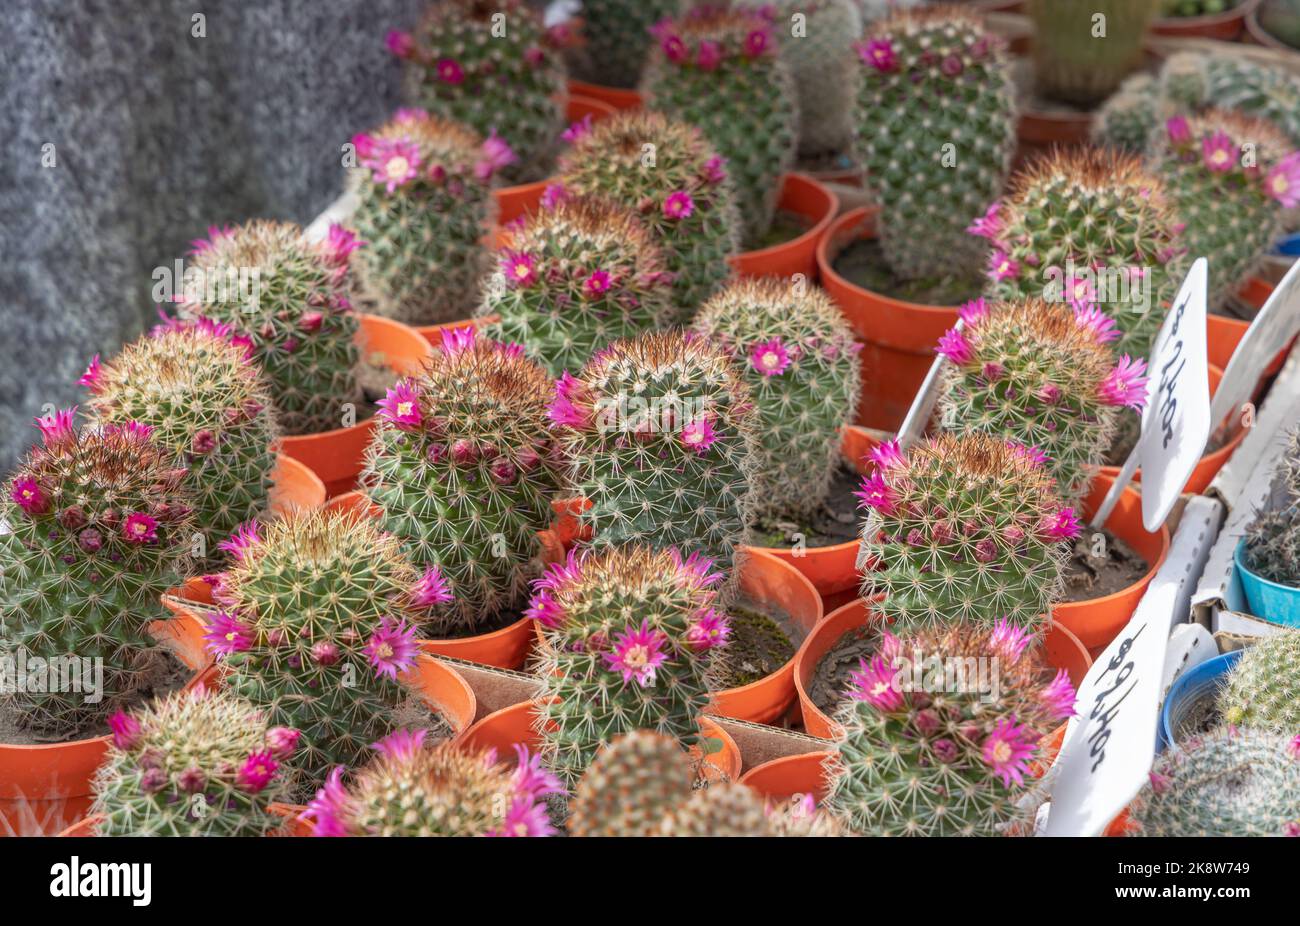 Cacti with flowers at a fair. Stock Photo